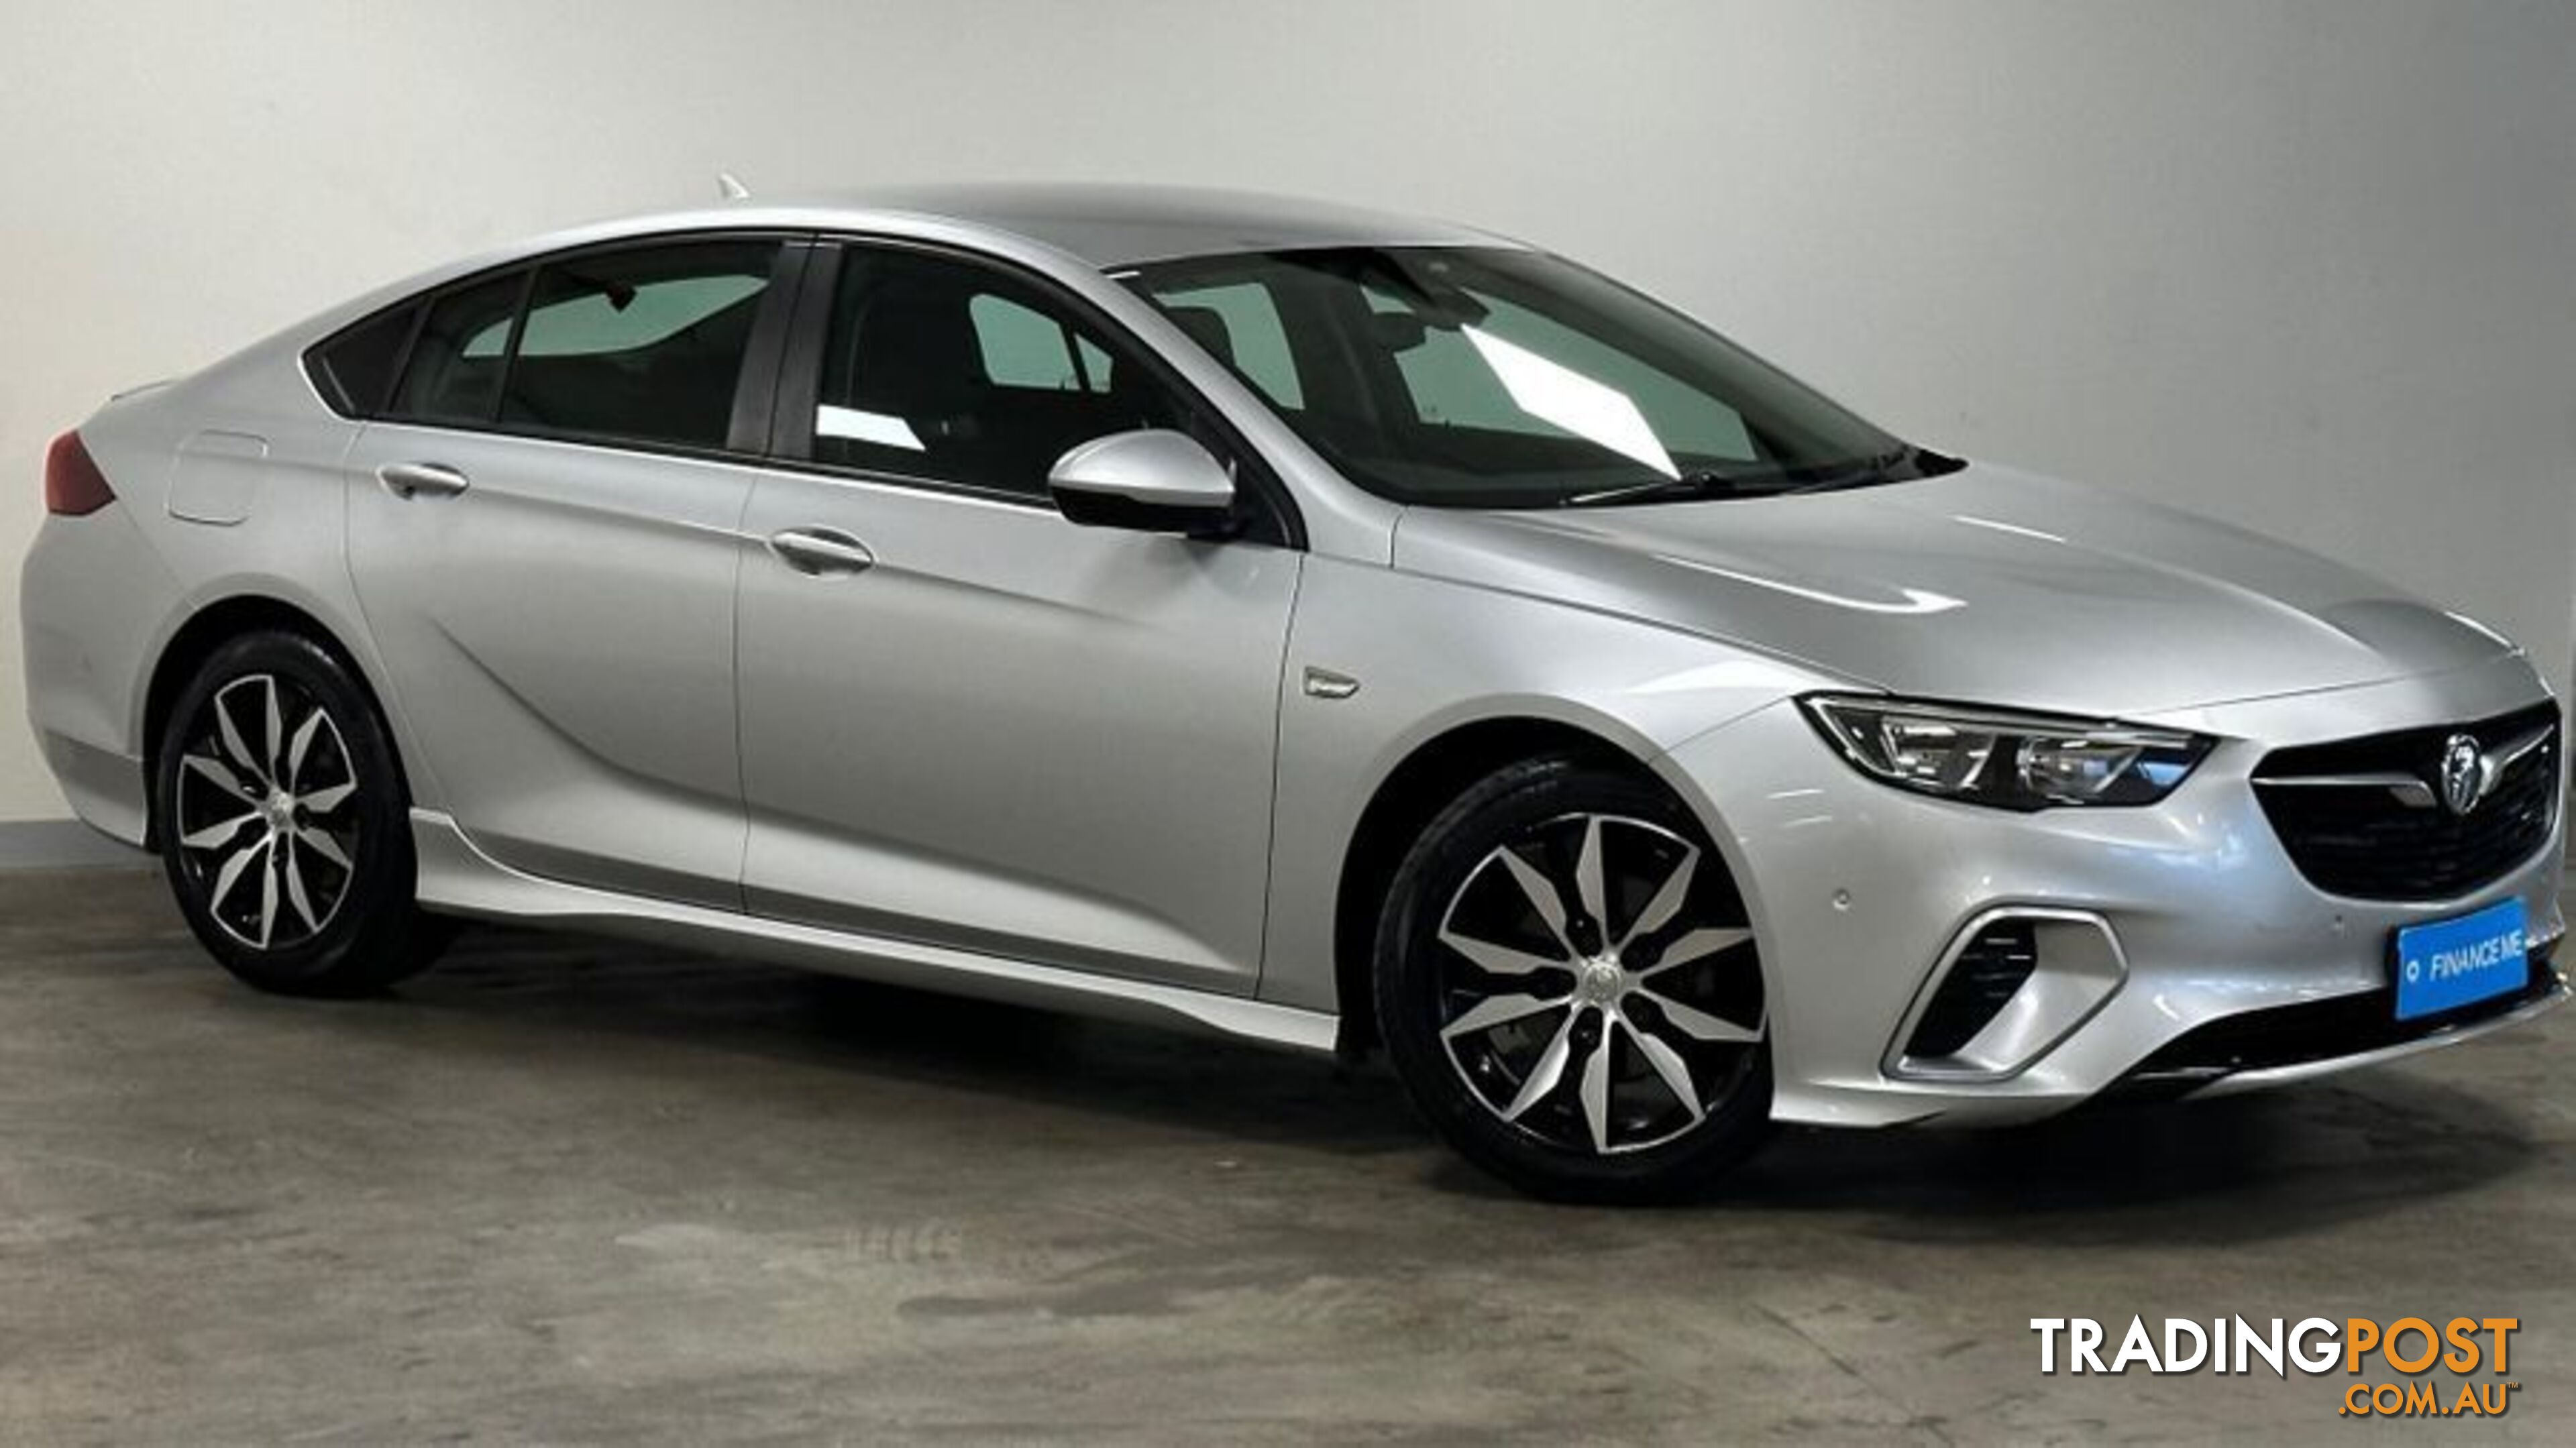 2018 HOLDEN COMMODORE RS ZB WAGON